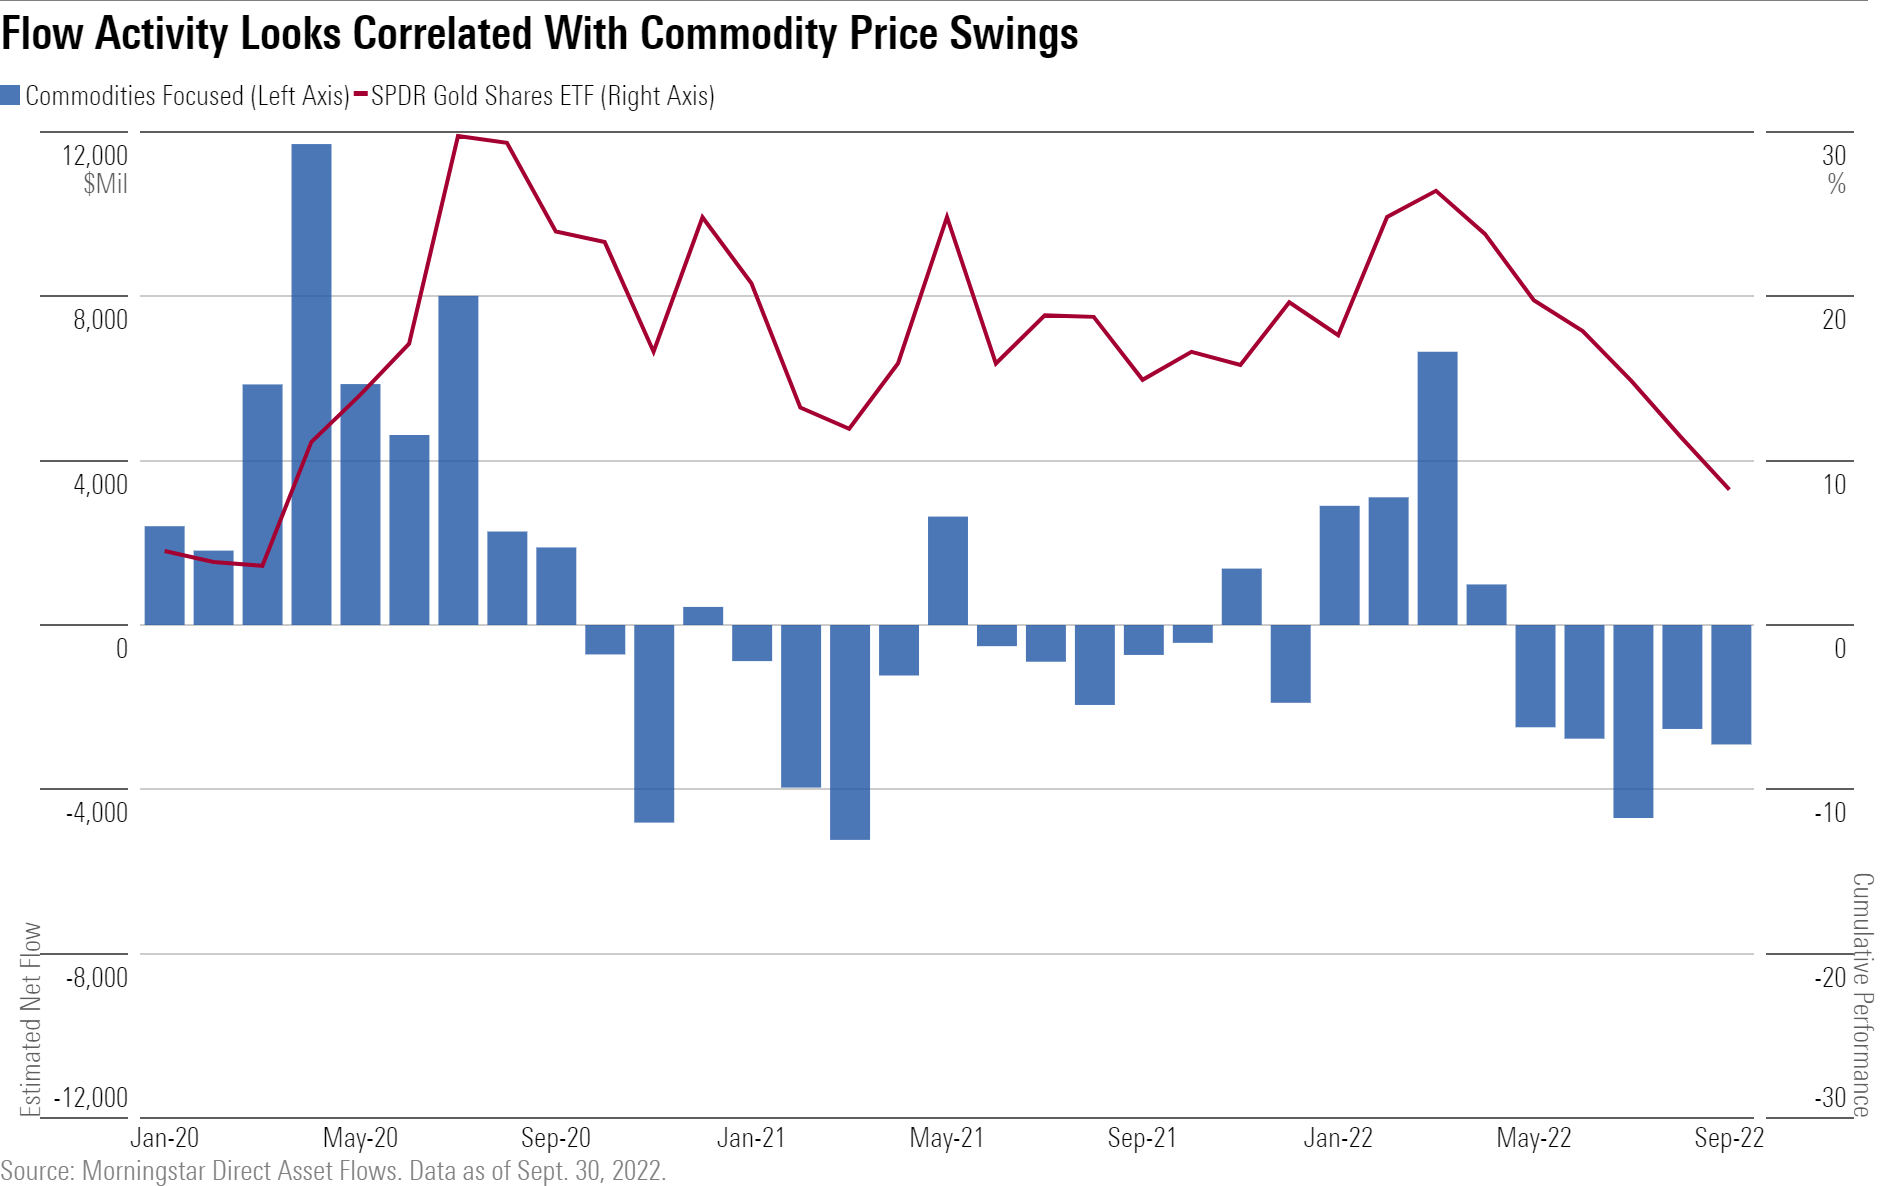 Flow activity in the commodities-focused category looks correlated with price swings in the underlying commodities.